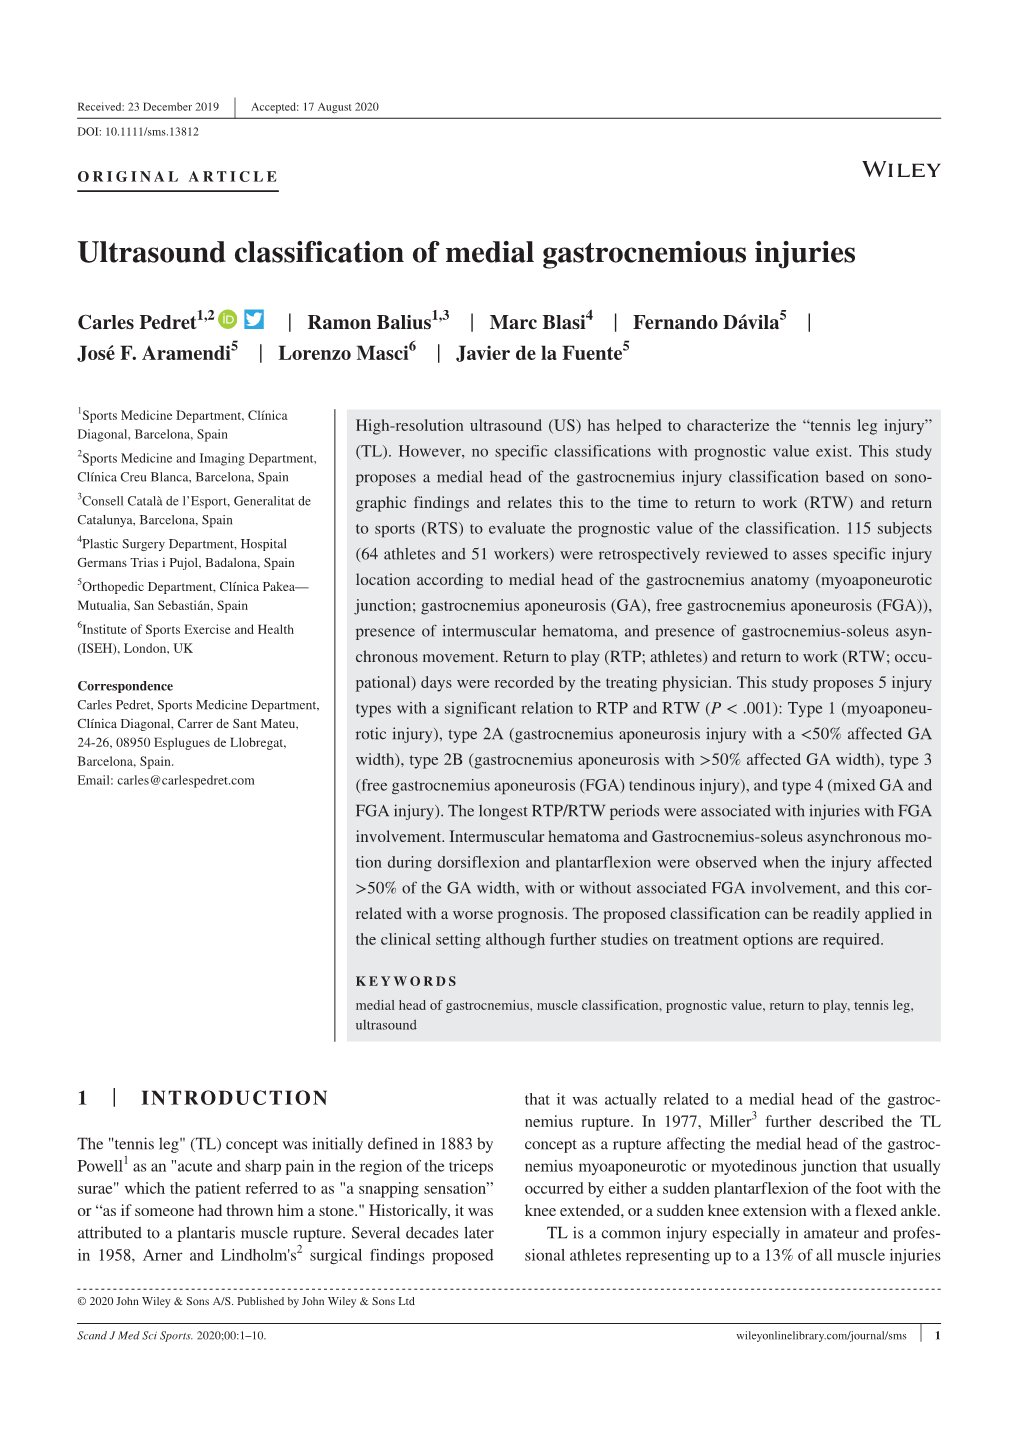 Ultrasound Classification of Medial Gastrocnemious Injuries